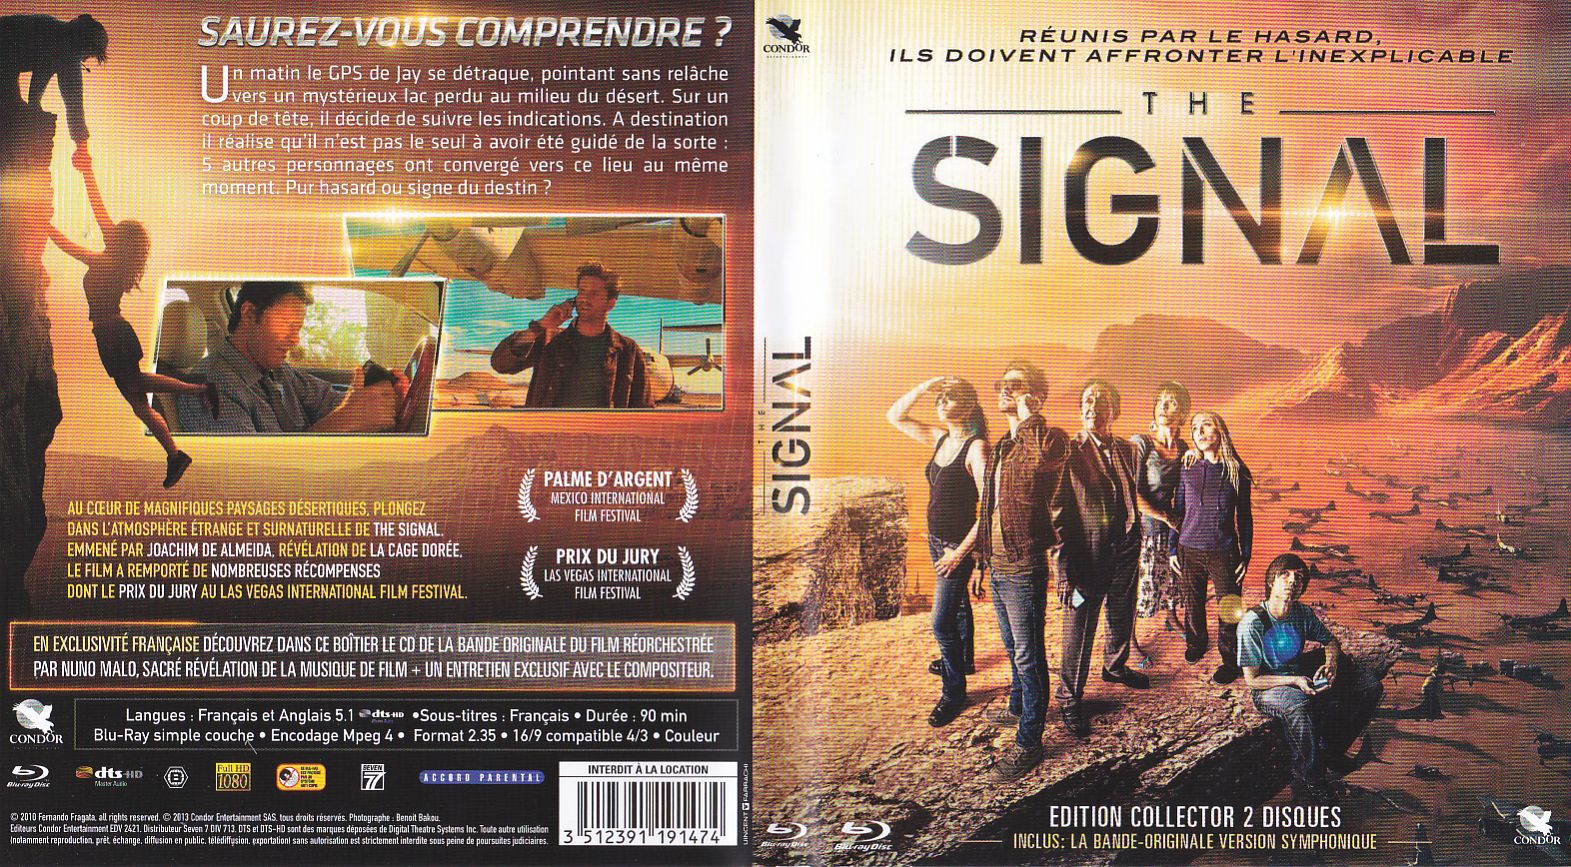 Jaquette DVD The signal (2010) (BLU-RAY)